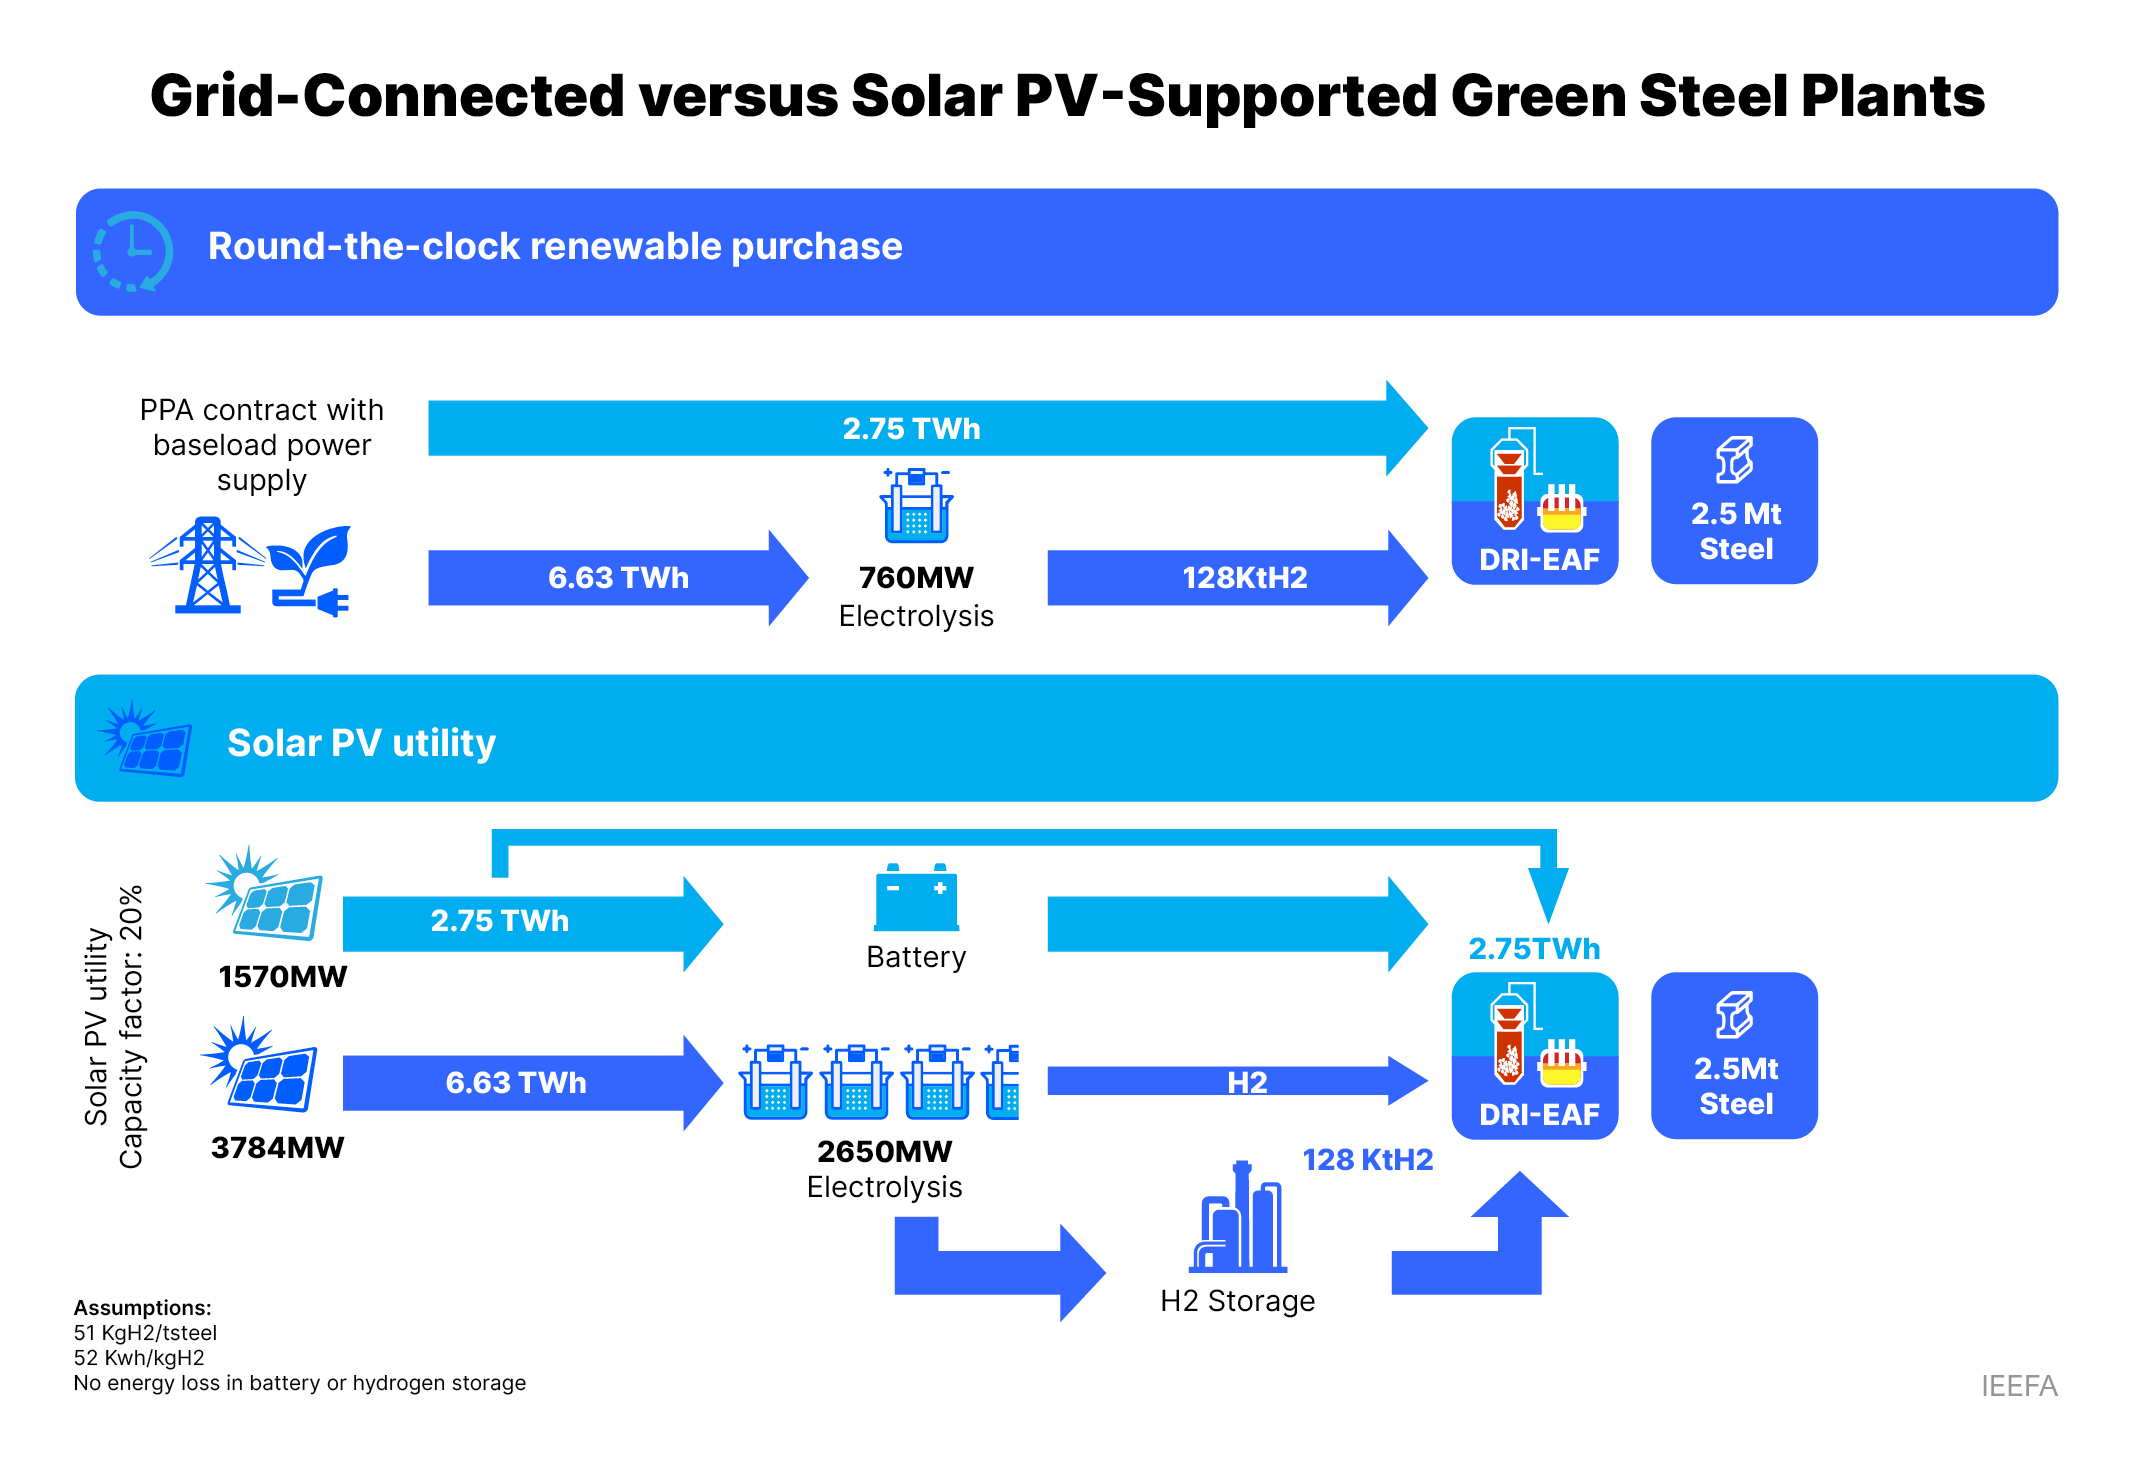 Grid-connect versus solar PV-supported green steel plants